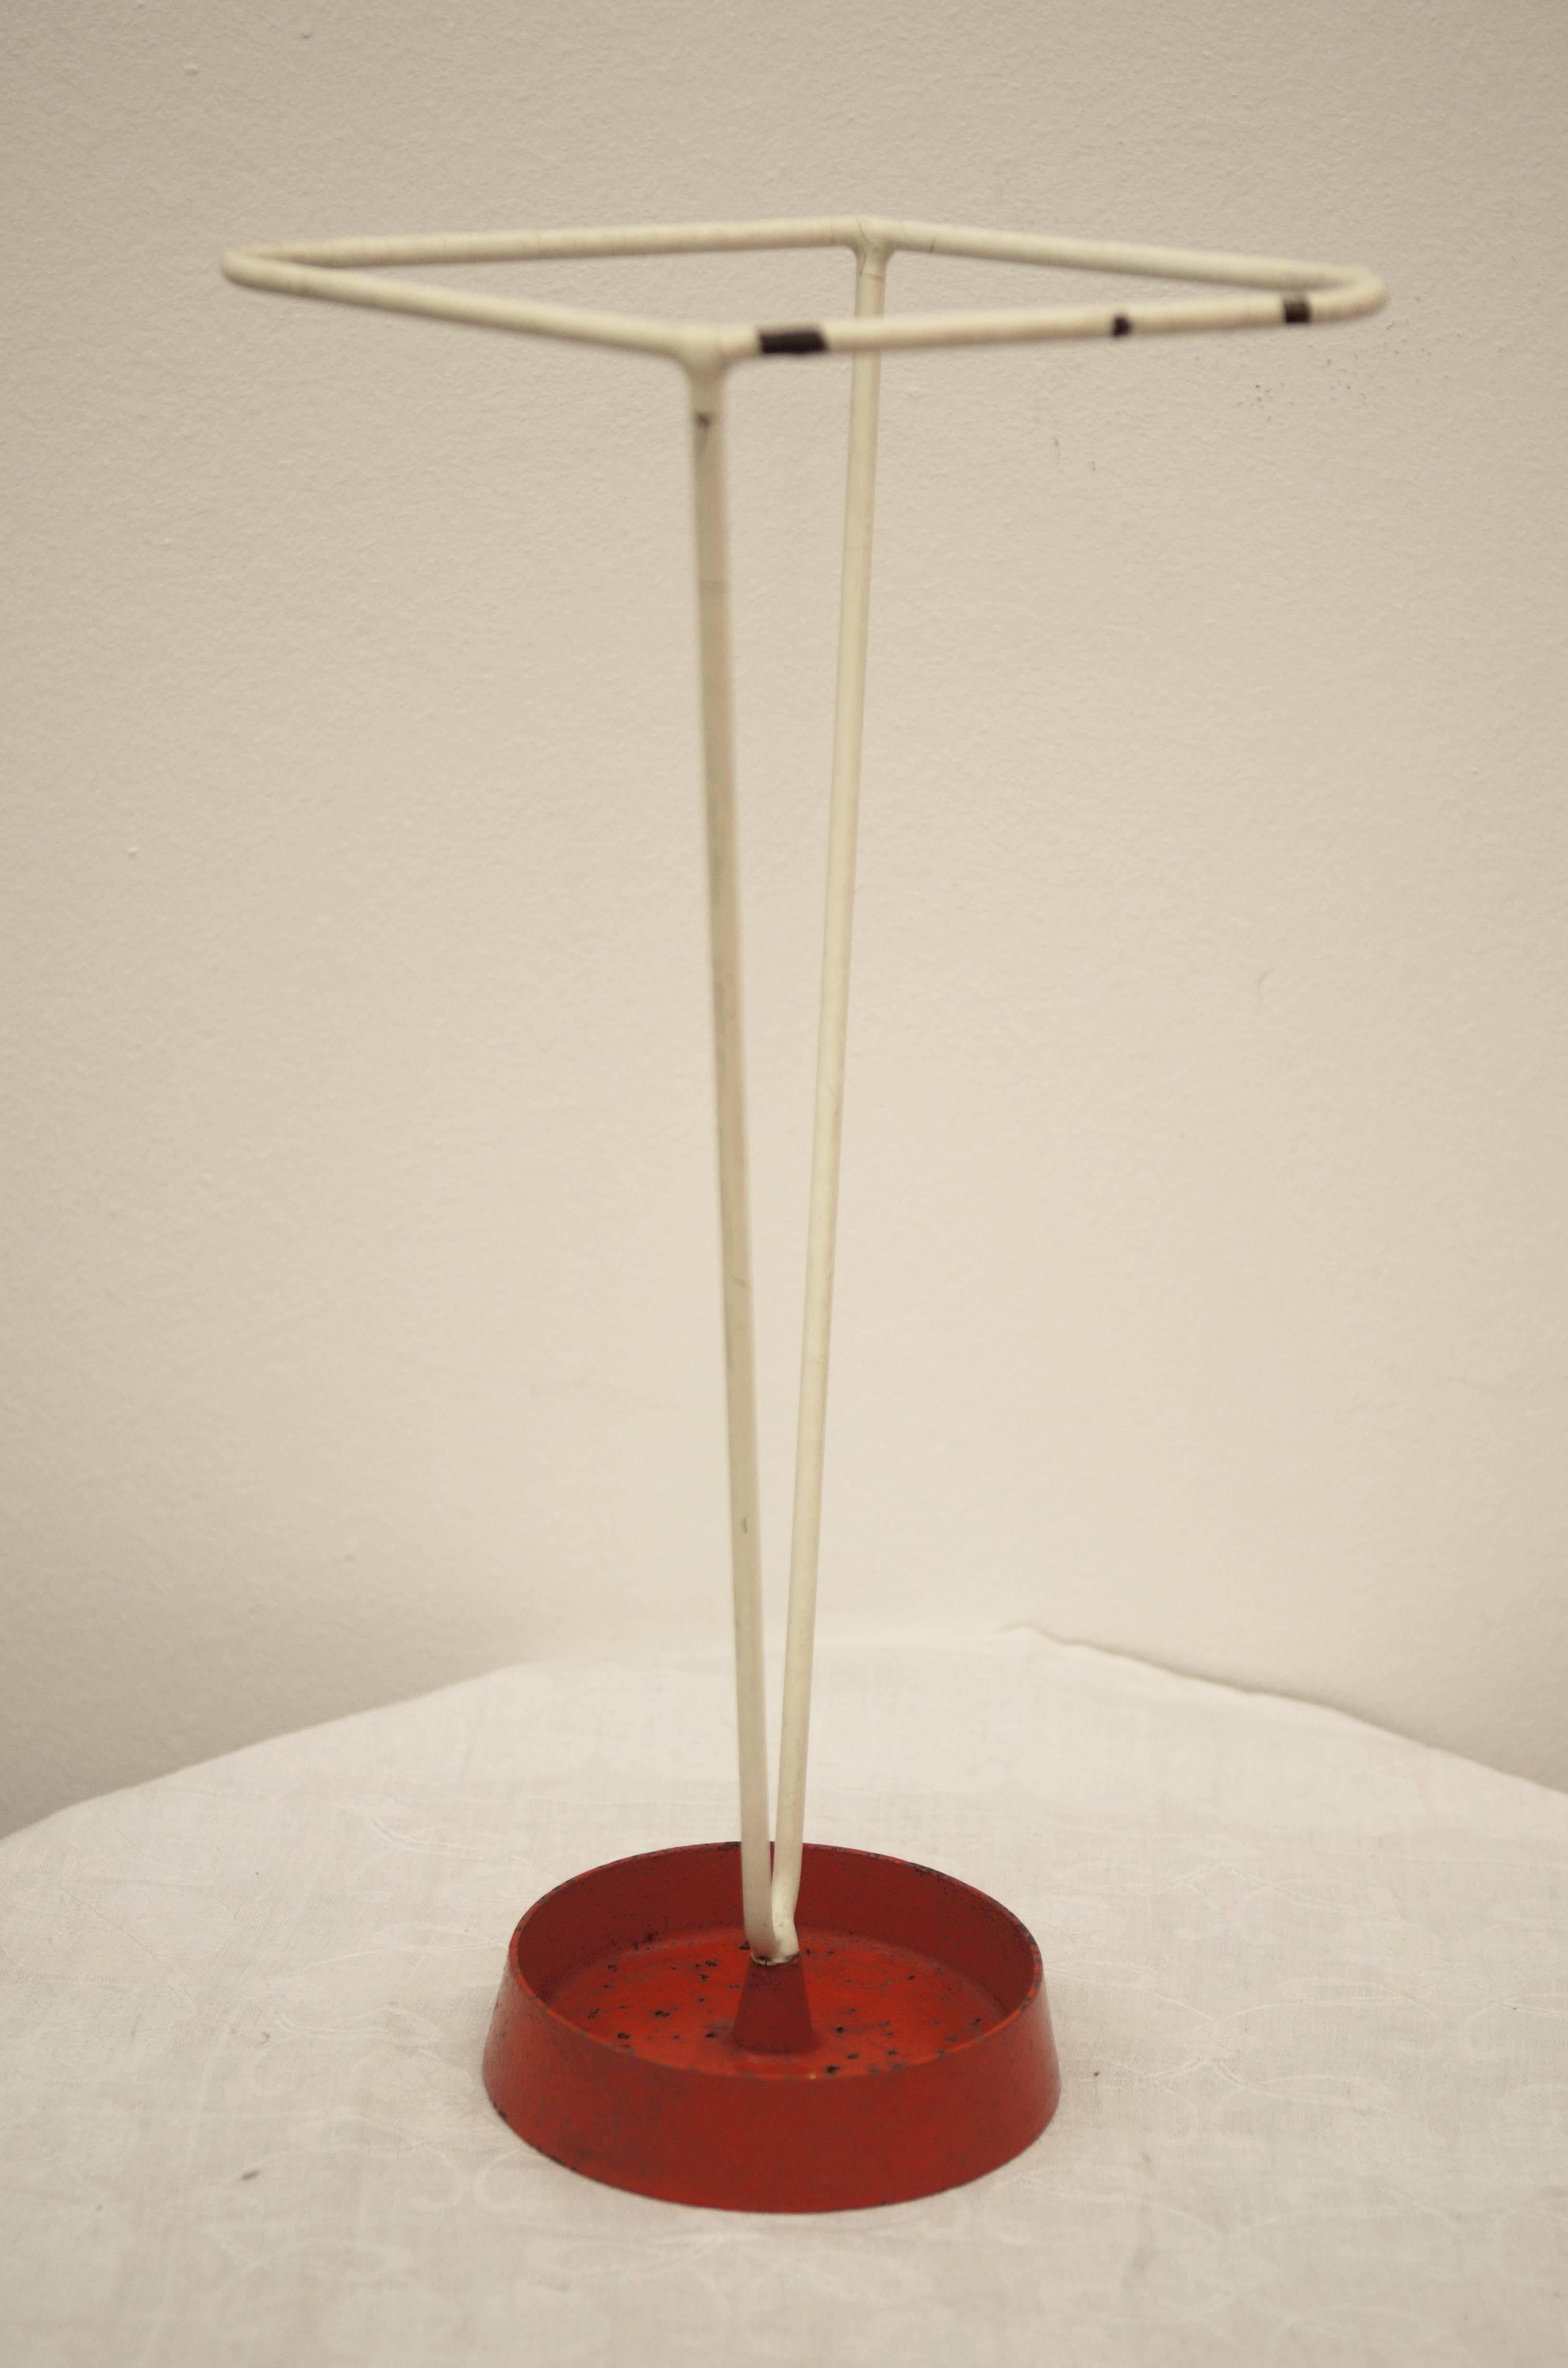 Stand foot made of cast iron with steel umbrella holders covered with plastic from the 1950s.